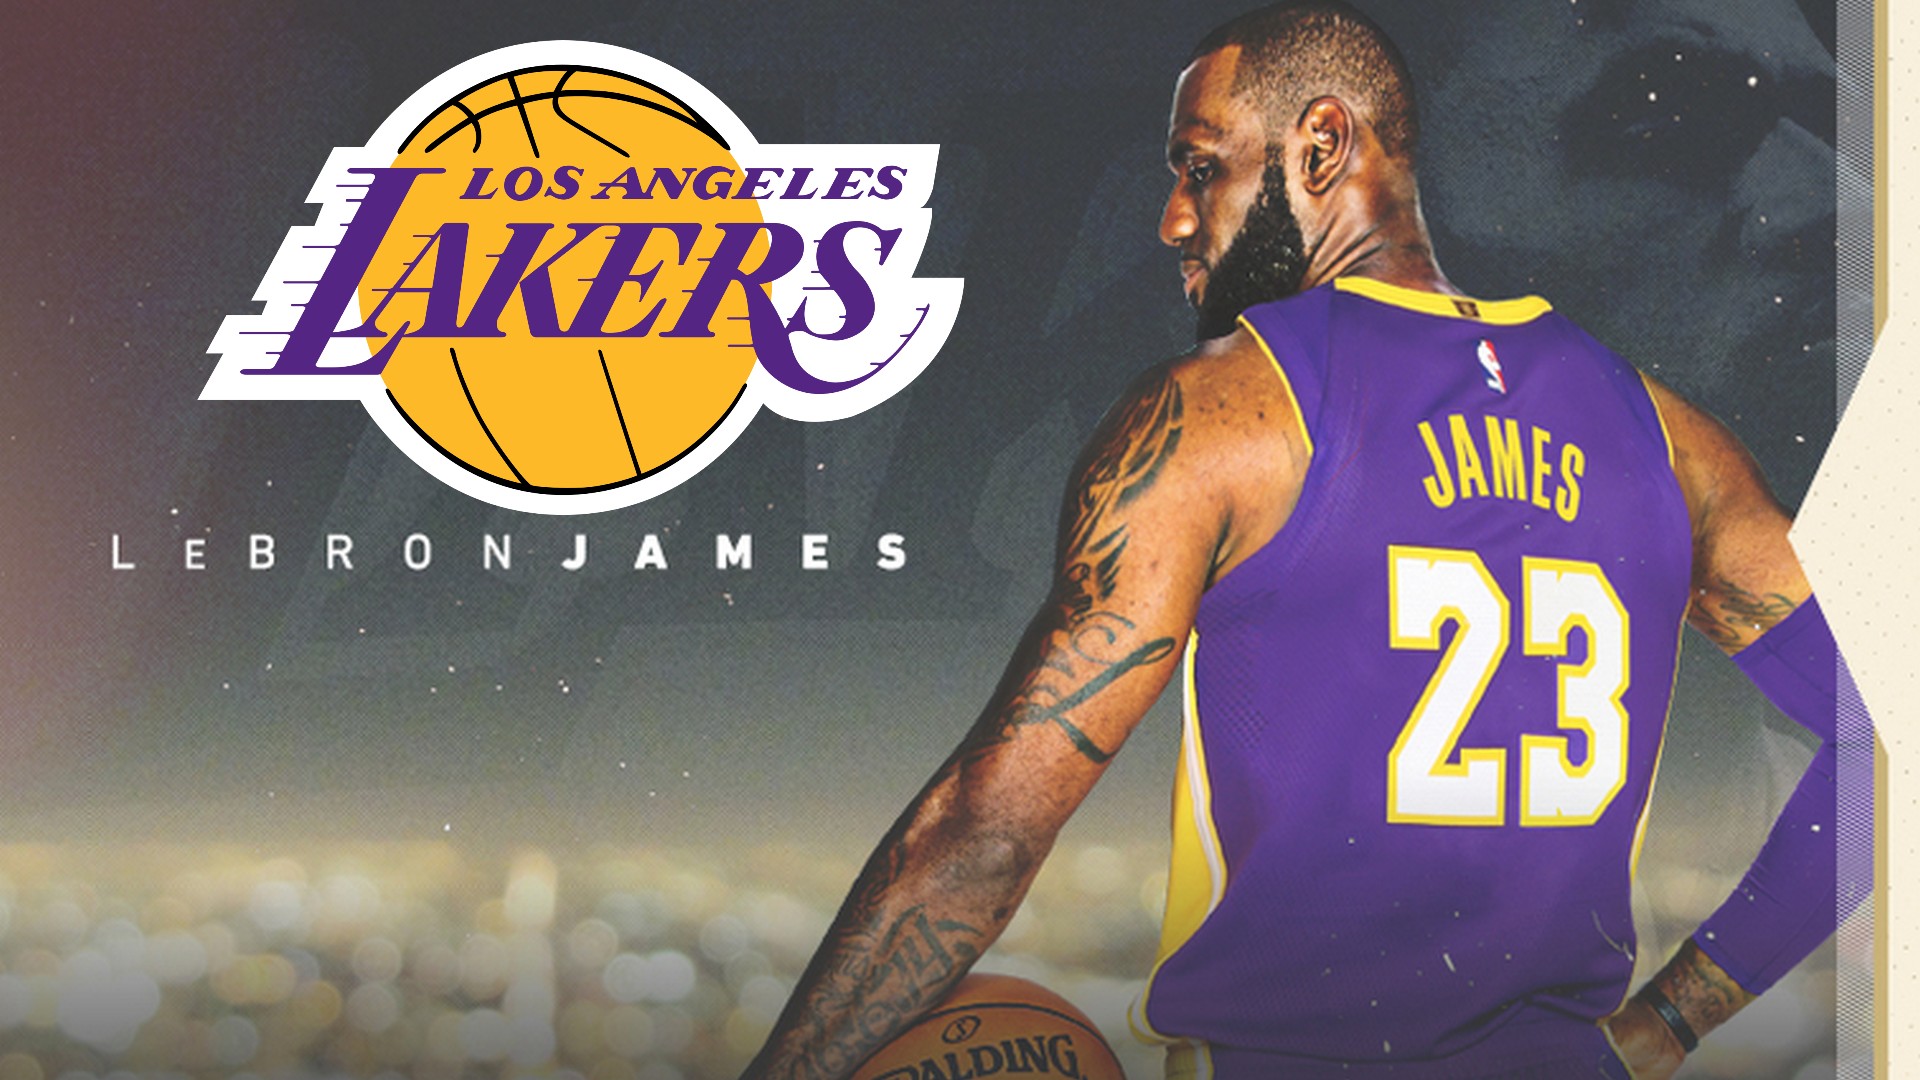 Wallpapers Hd Lebron James Lakers With Image Dimensions - Lebron James Desktop Wallpaper Lakers - HD Wallpaper 